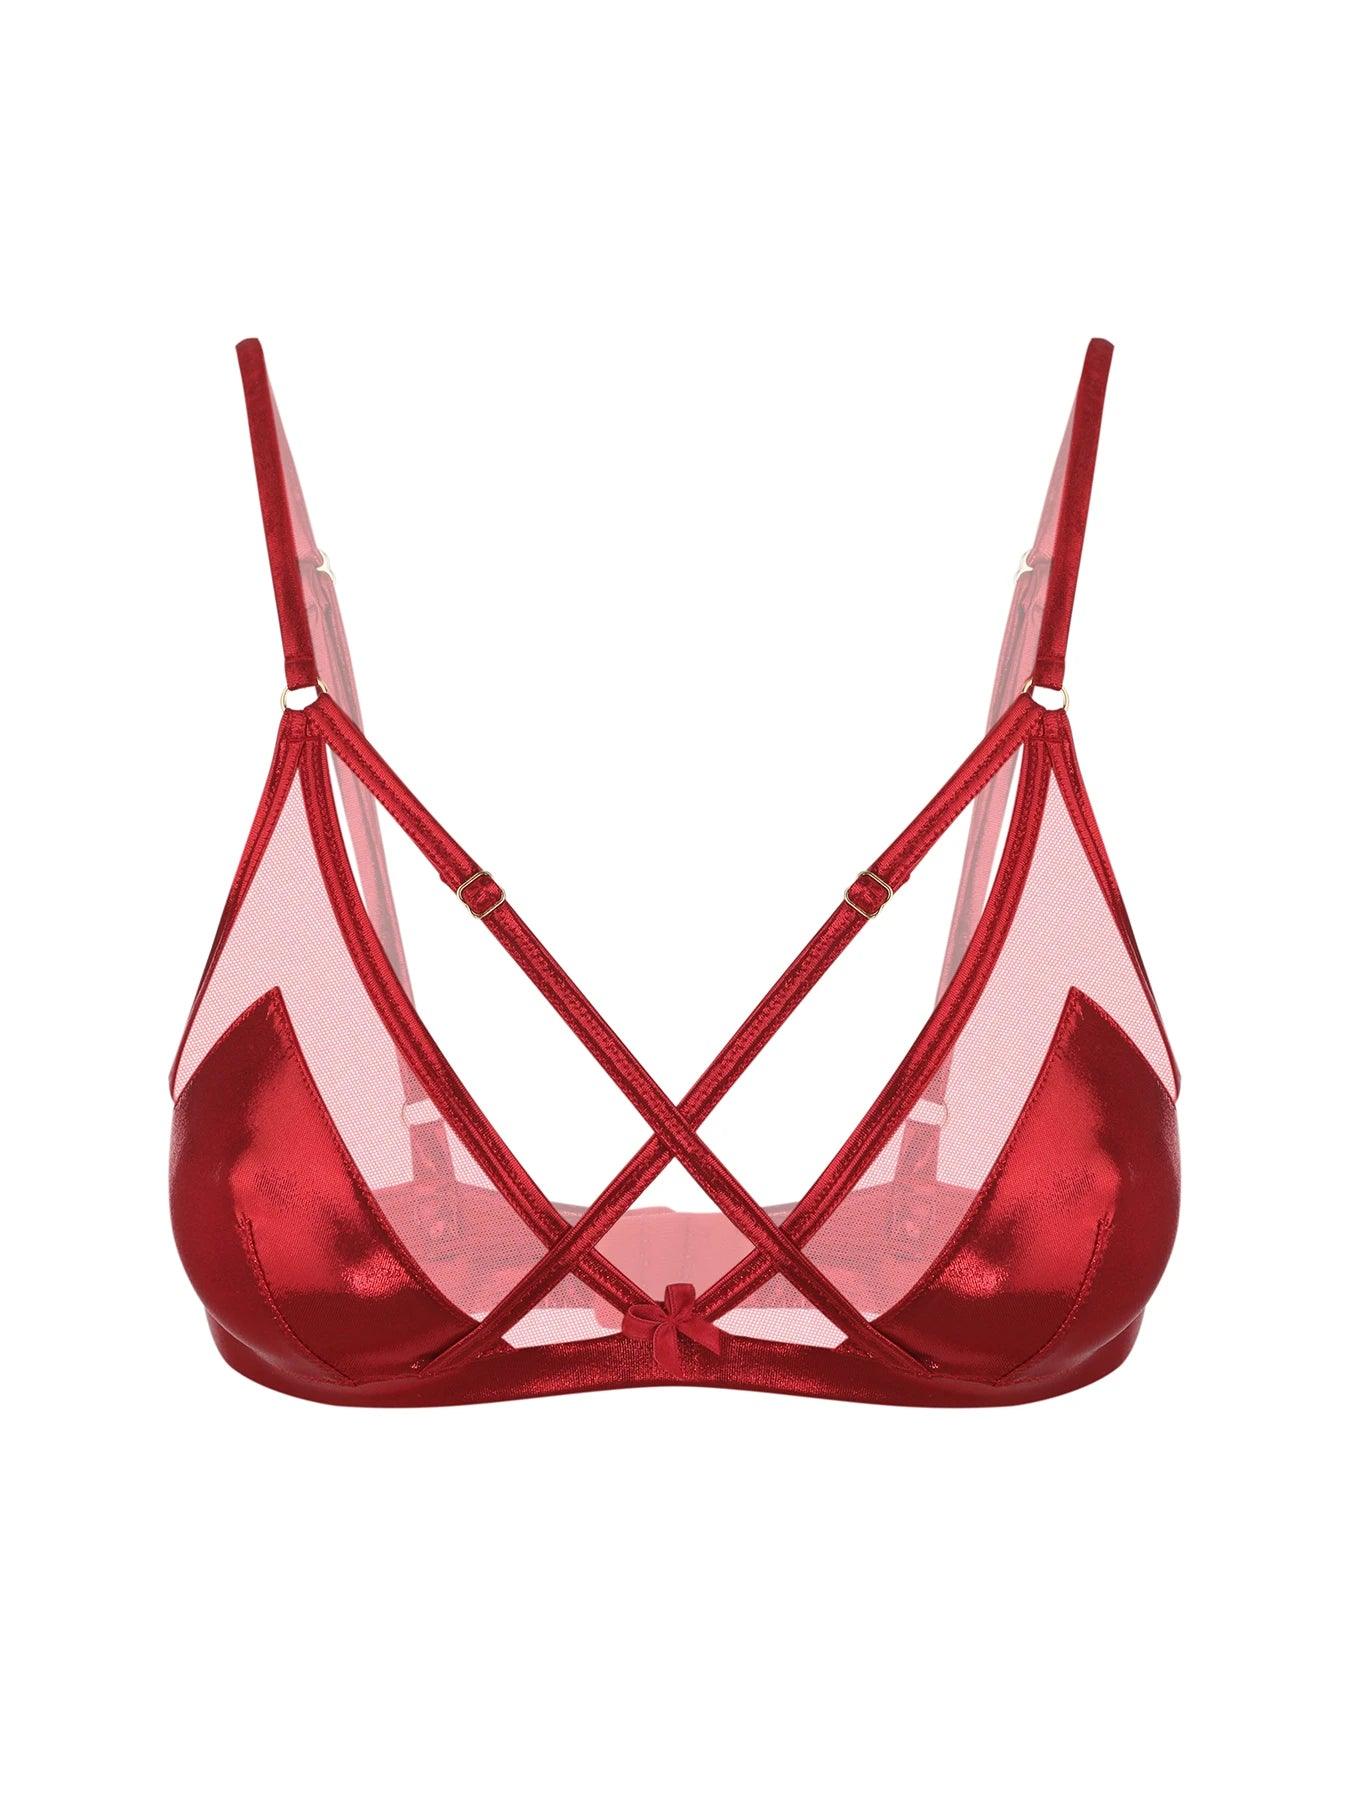 Sexy Bra Online Shopping Guide. Anyone who wants to try something…, by  VienneMilano